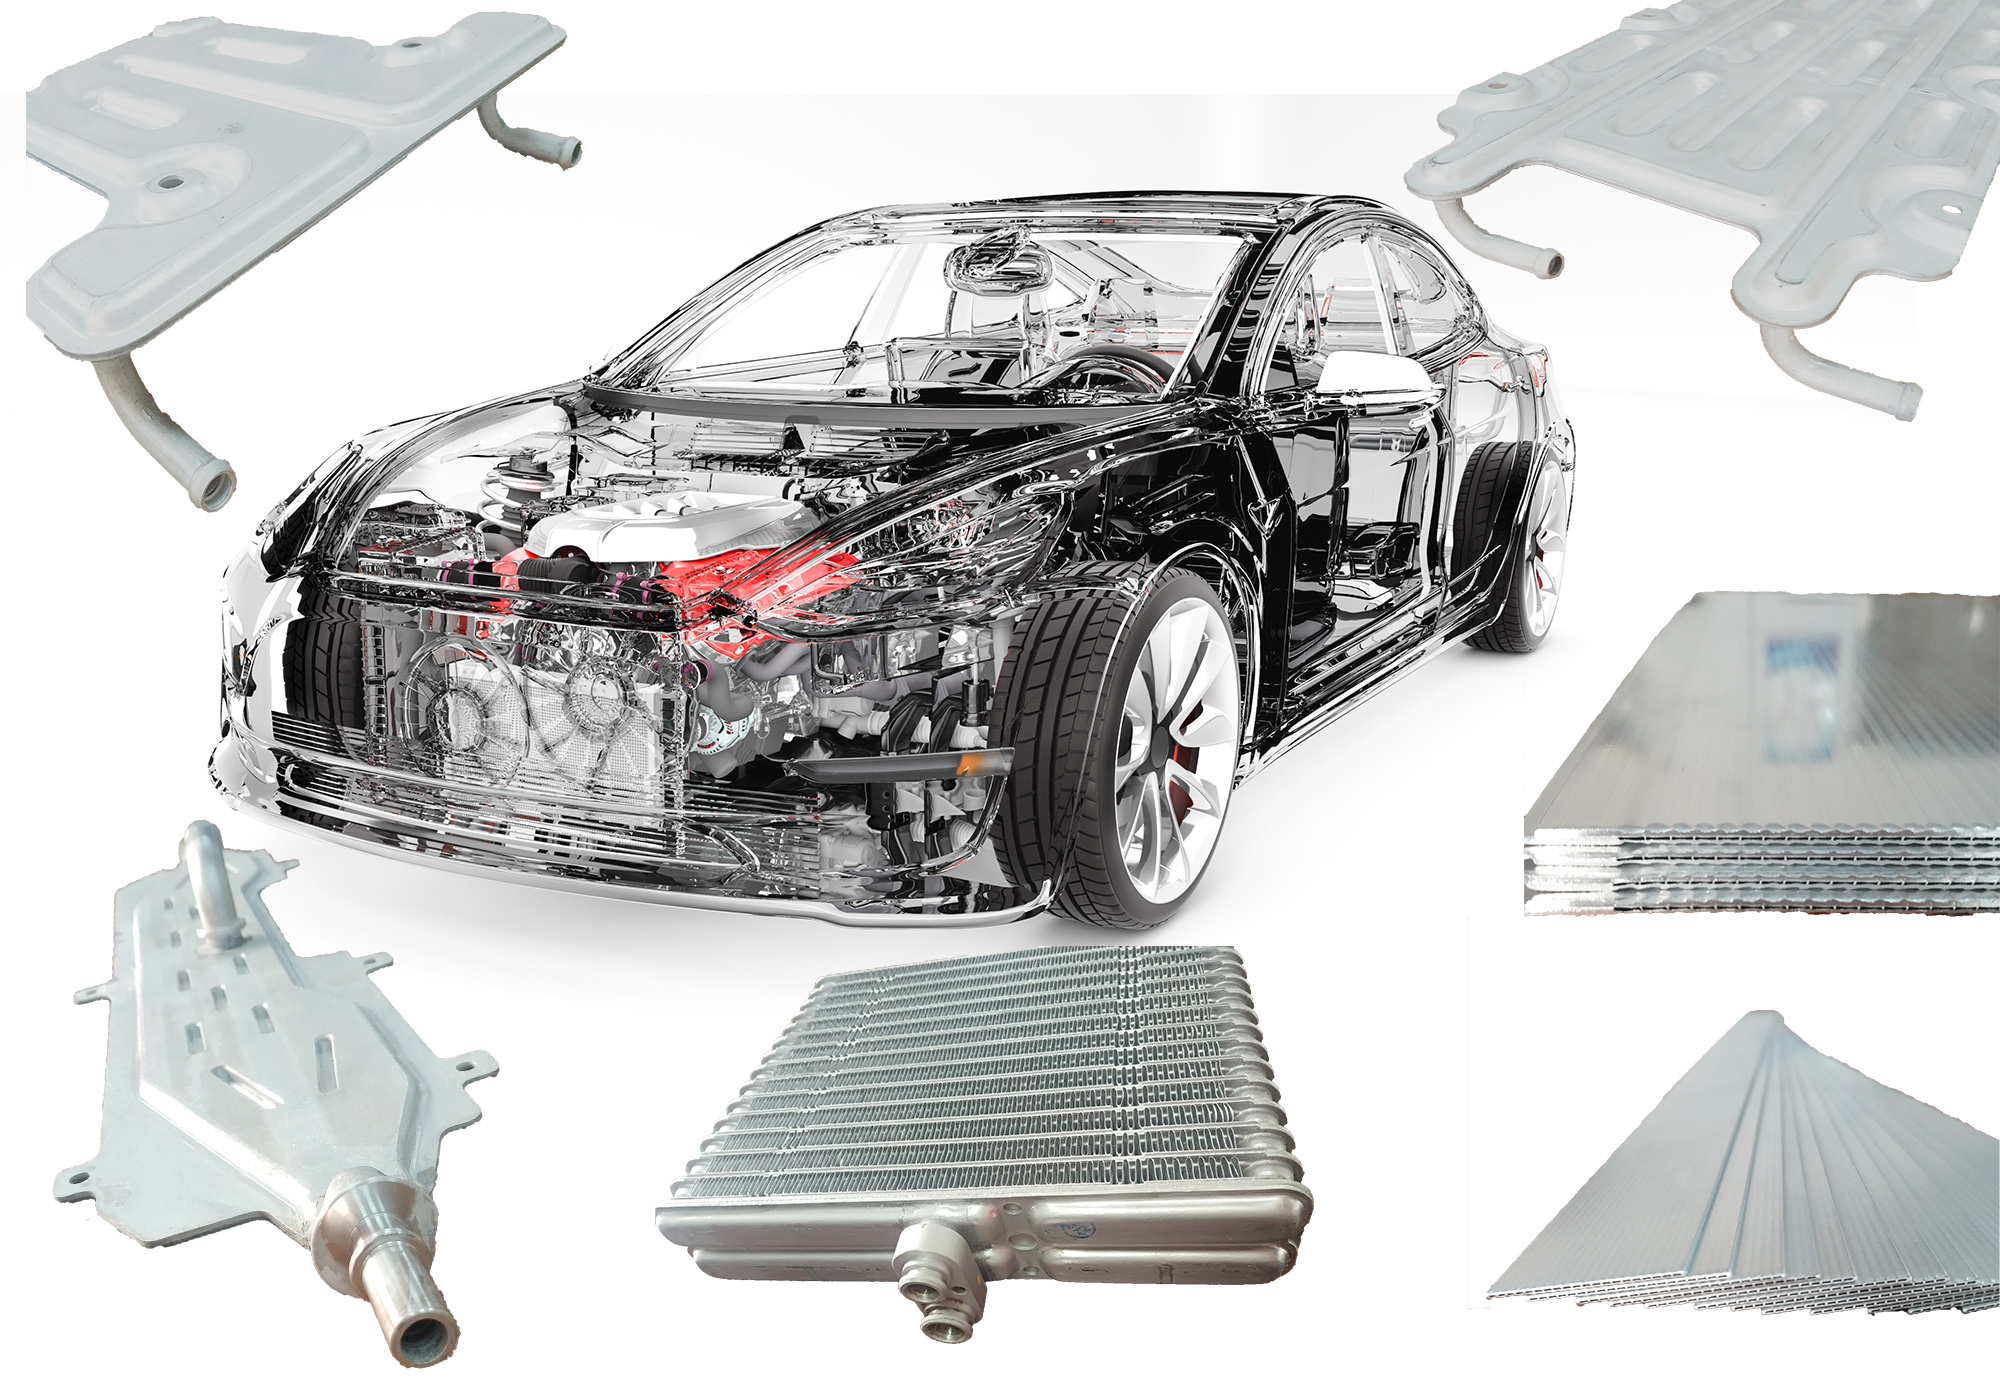 Study of Electric Vehicle Battery Thermal Management System